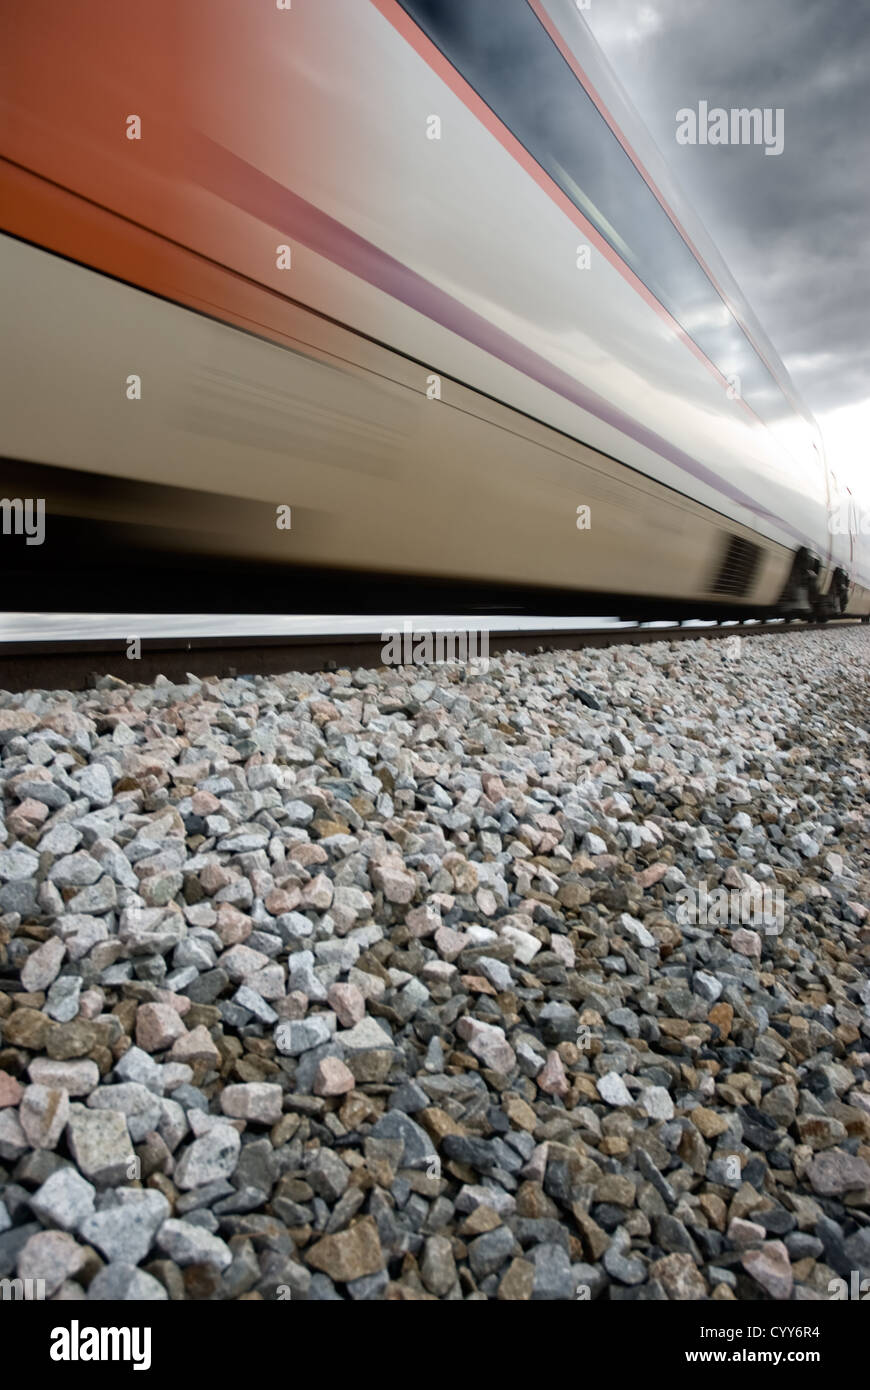 A train in movement. Speed symbol Stock Photo